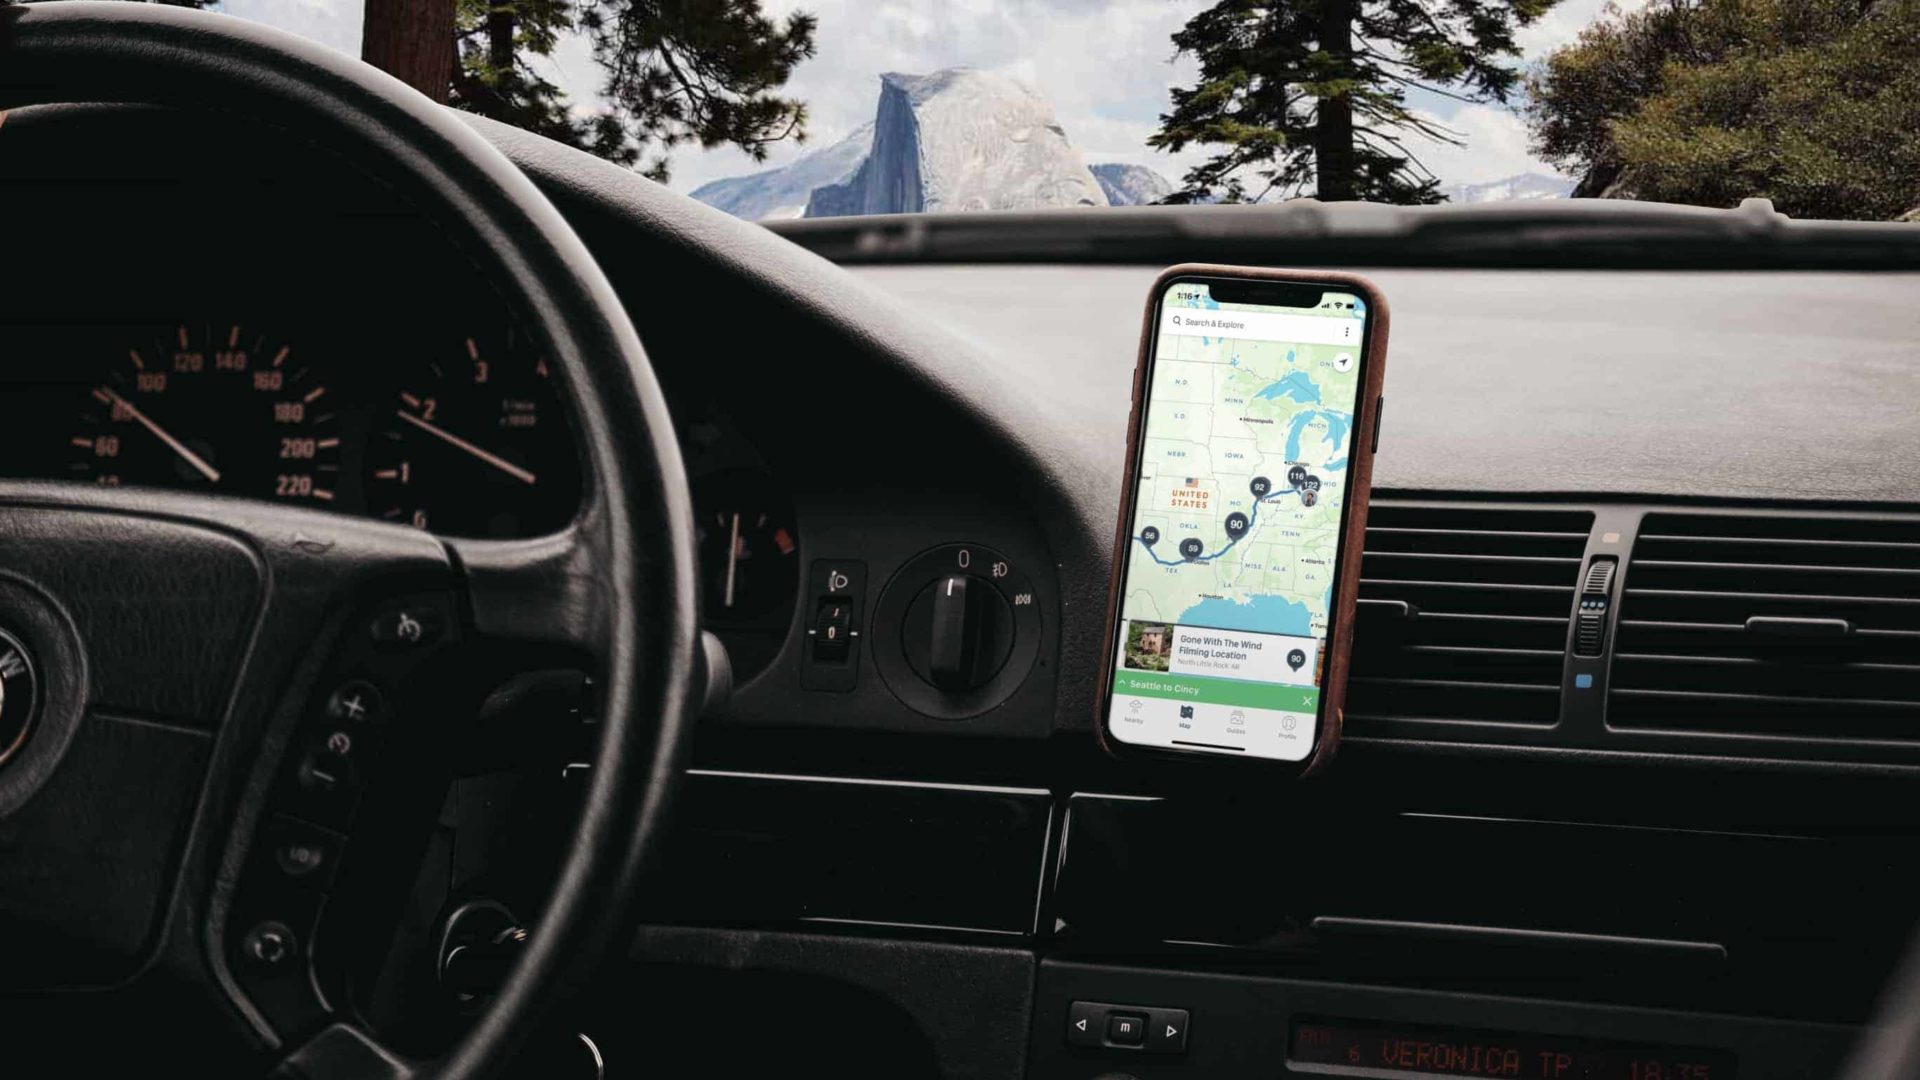 The #1 road trip planning app just got way better.